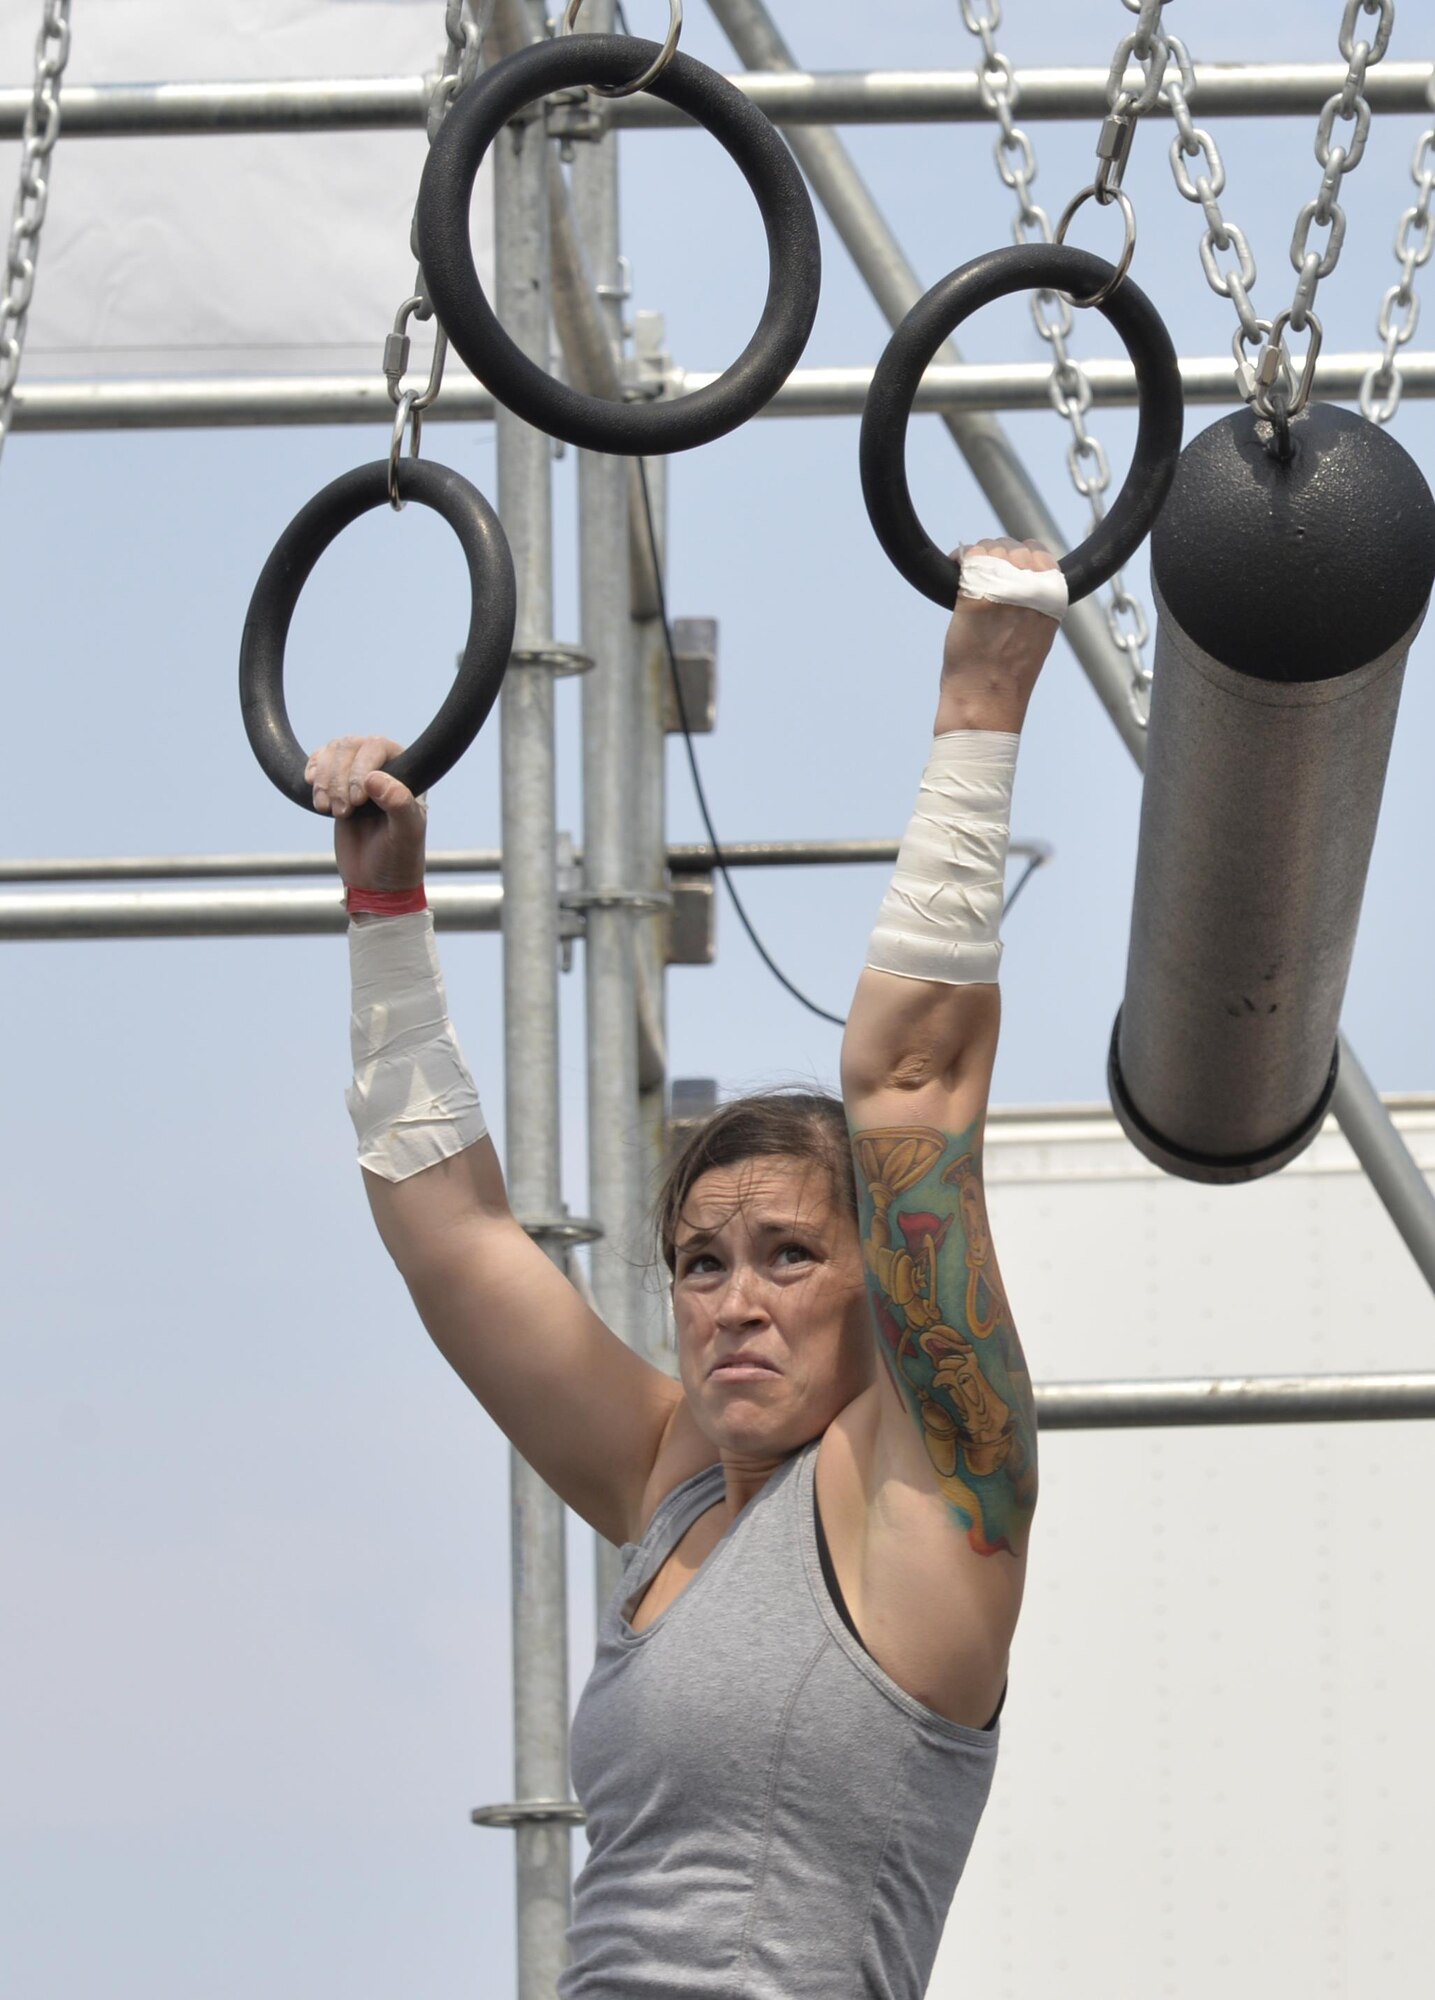 Staff Sgt. Amanda Hood, non-commissioned officer in charge of admin support assigned to Ellsworth’s Office of Special Investigations, pushes herself to complete the Alpha Warrior Battle Rig course, at Ellsworth Air Force Base, S.D. on Aug. 5, 2017.  The course required immense physical strength in order to be completed. The Battle Rig consisted of five strength testing obstacles, requiring participants to swing, climb and lift their way to the finish. (U.S. Air Force photo by Airman 1st Class Michella T. Stowers)